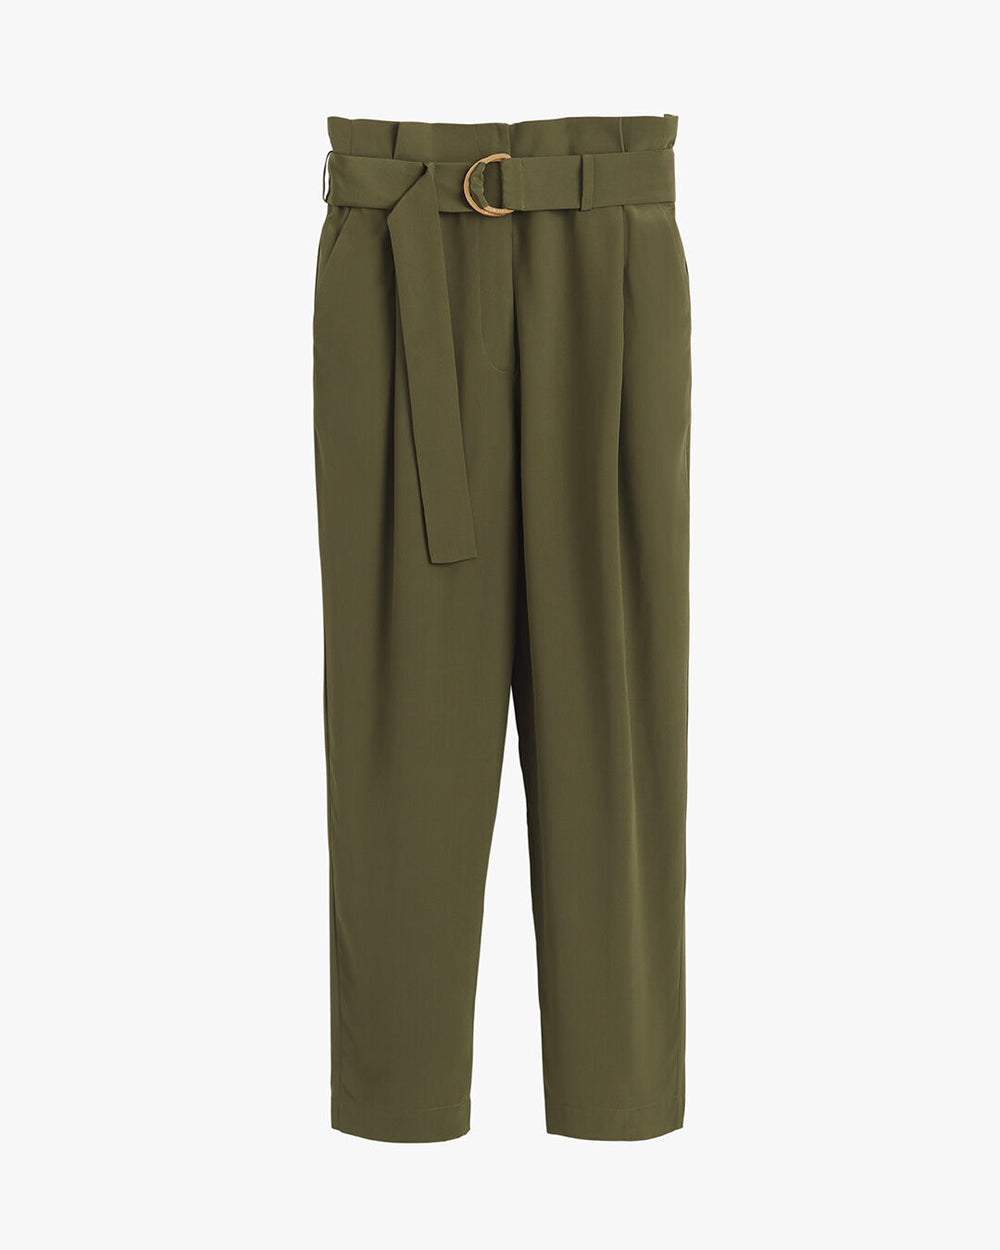 Belted trousers with pleats and side pockets displayed against a plain background.